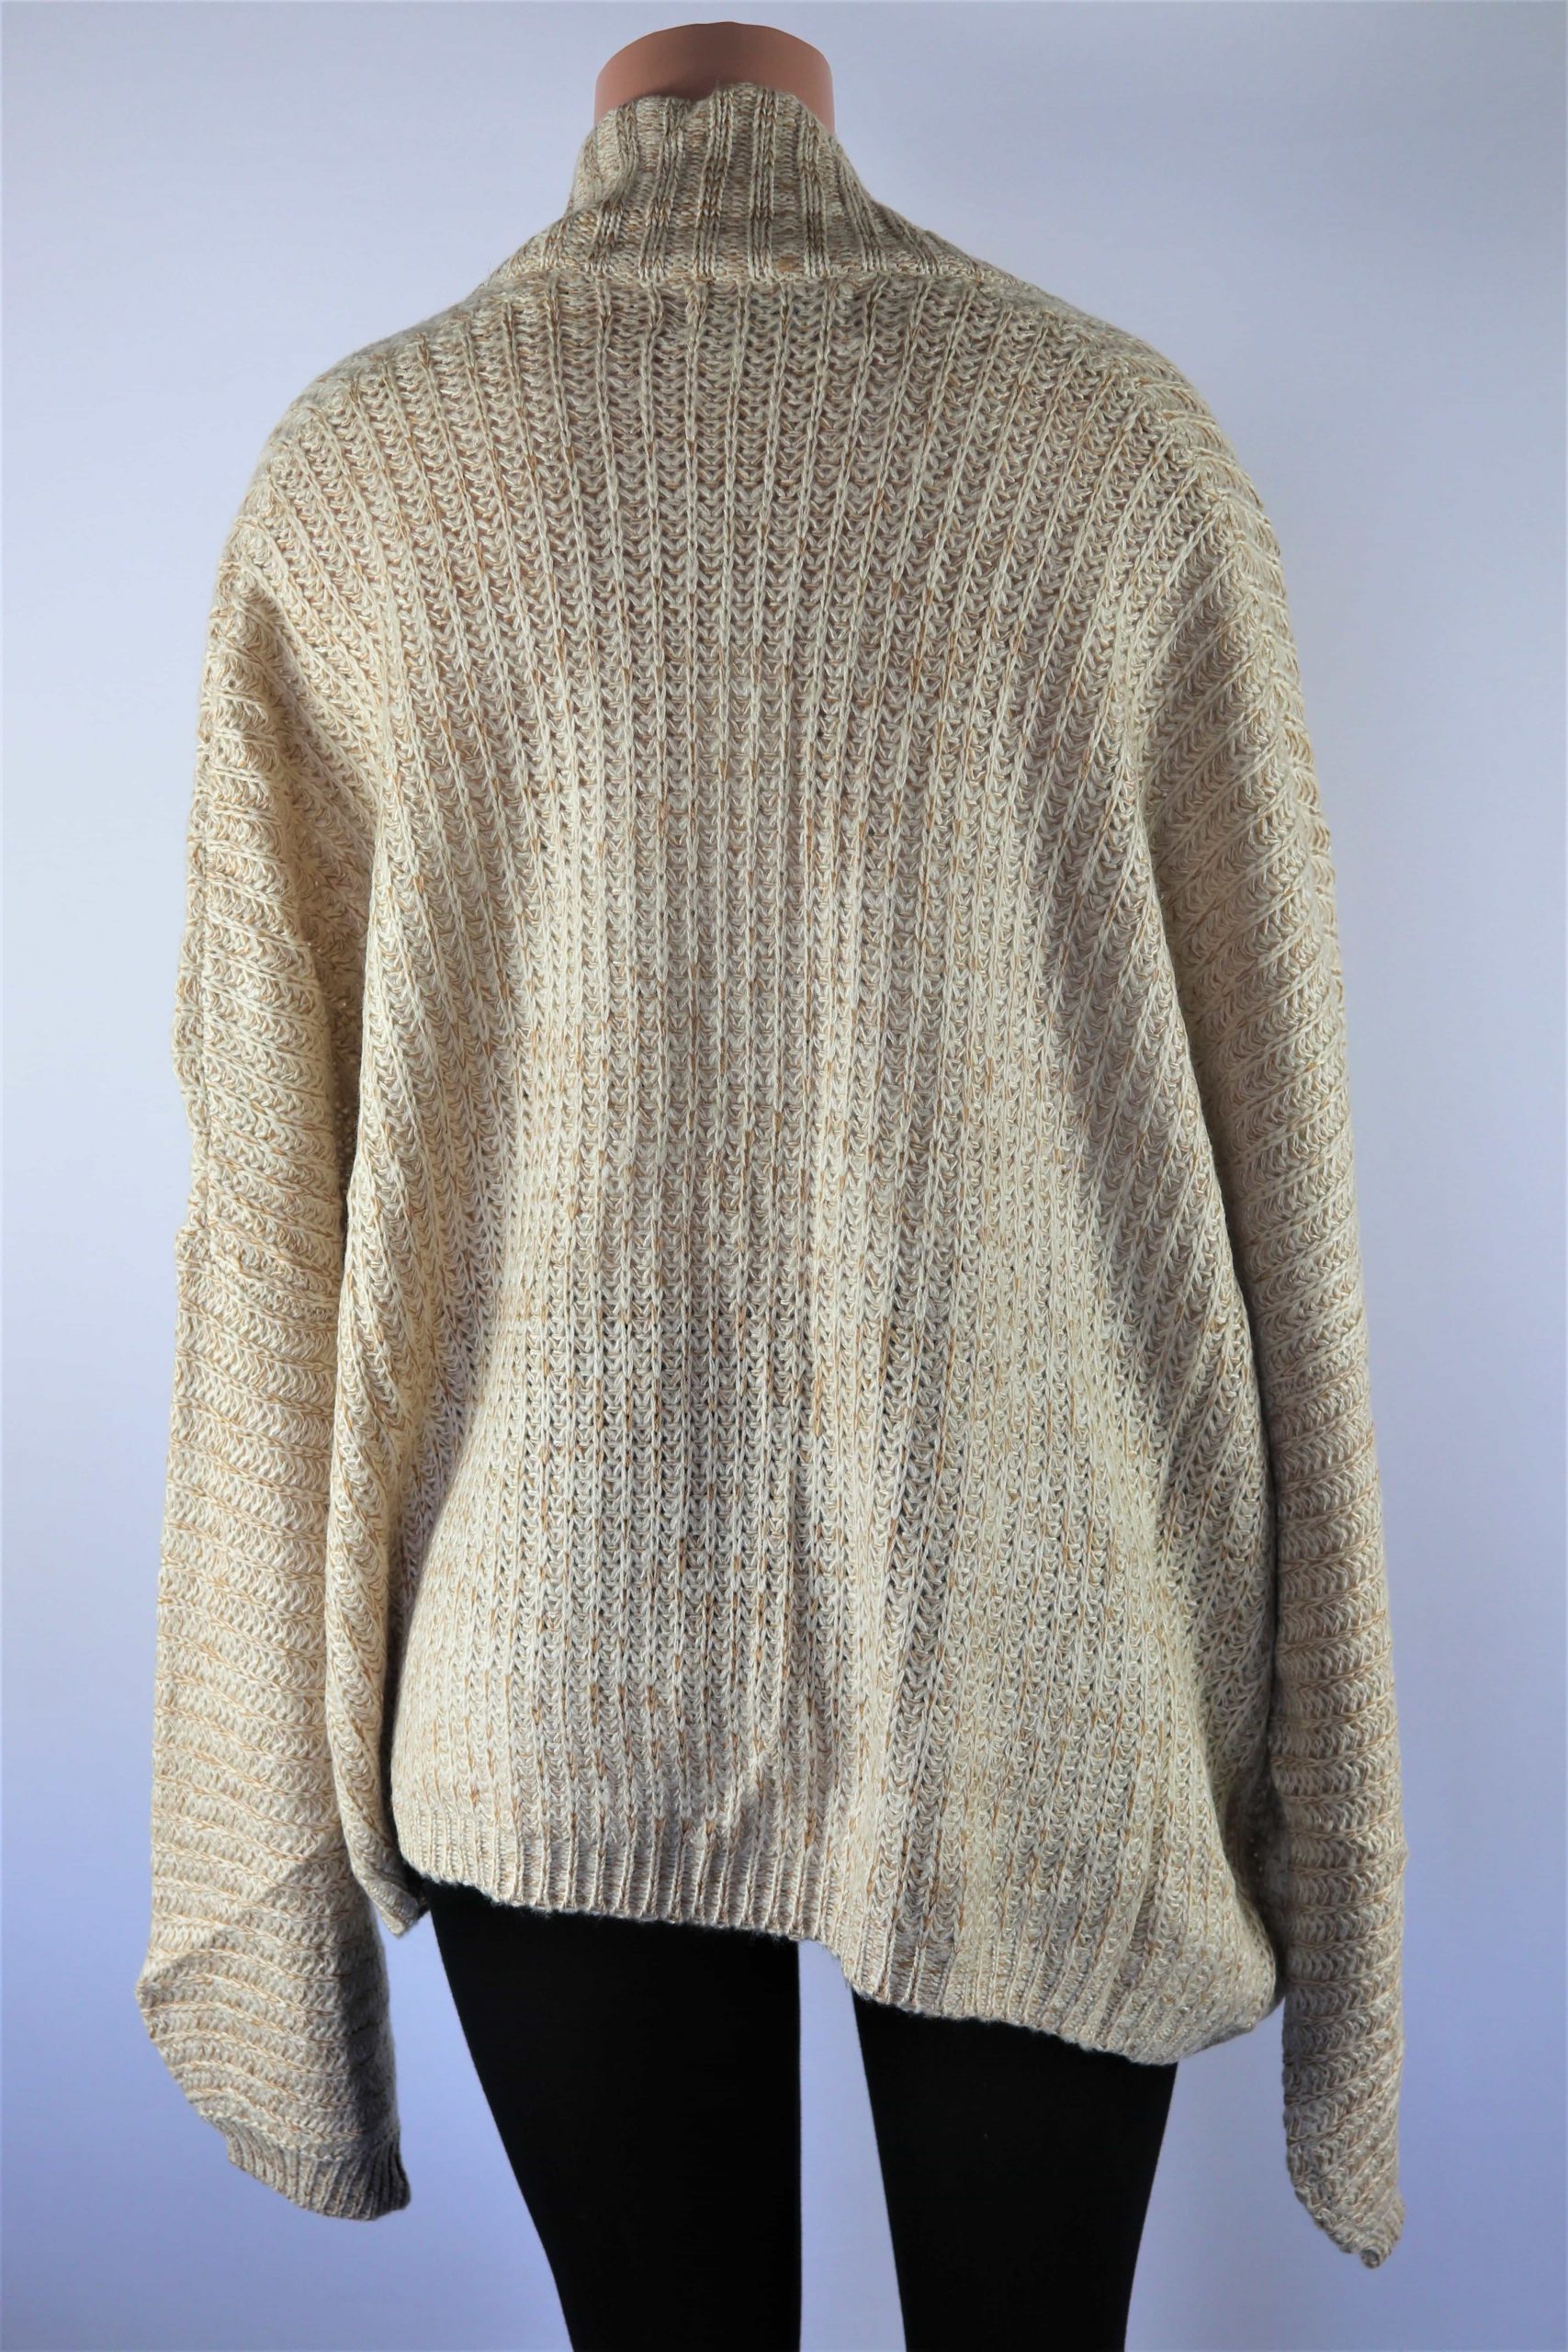 Nude Cardigan - Nude long sleeve knit cardigan with pockets.